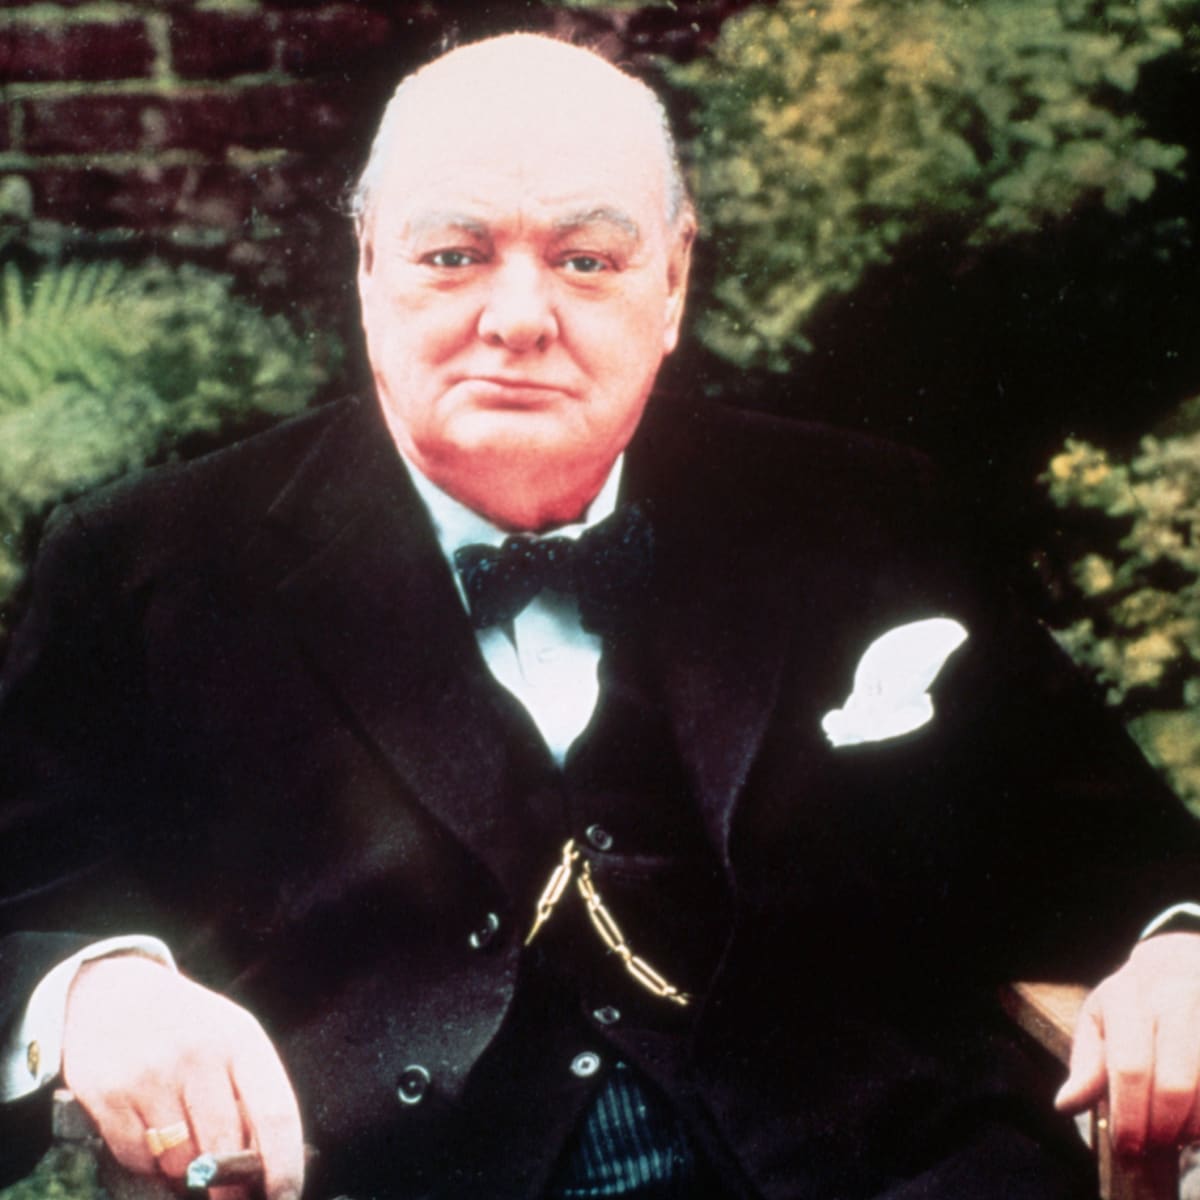 Lord Winston S. Churchill-Able Minister